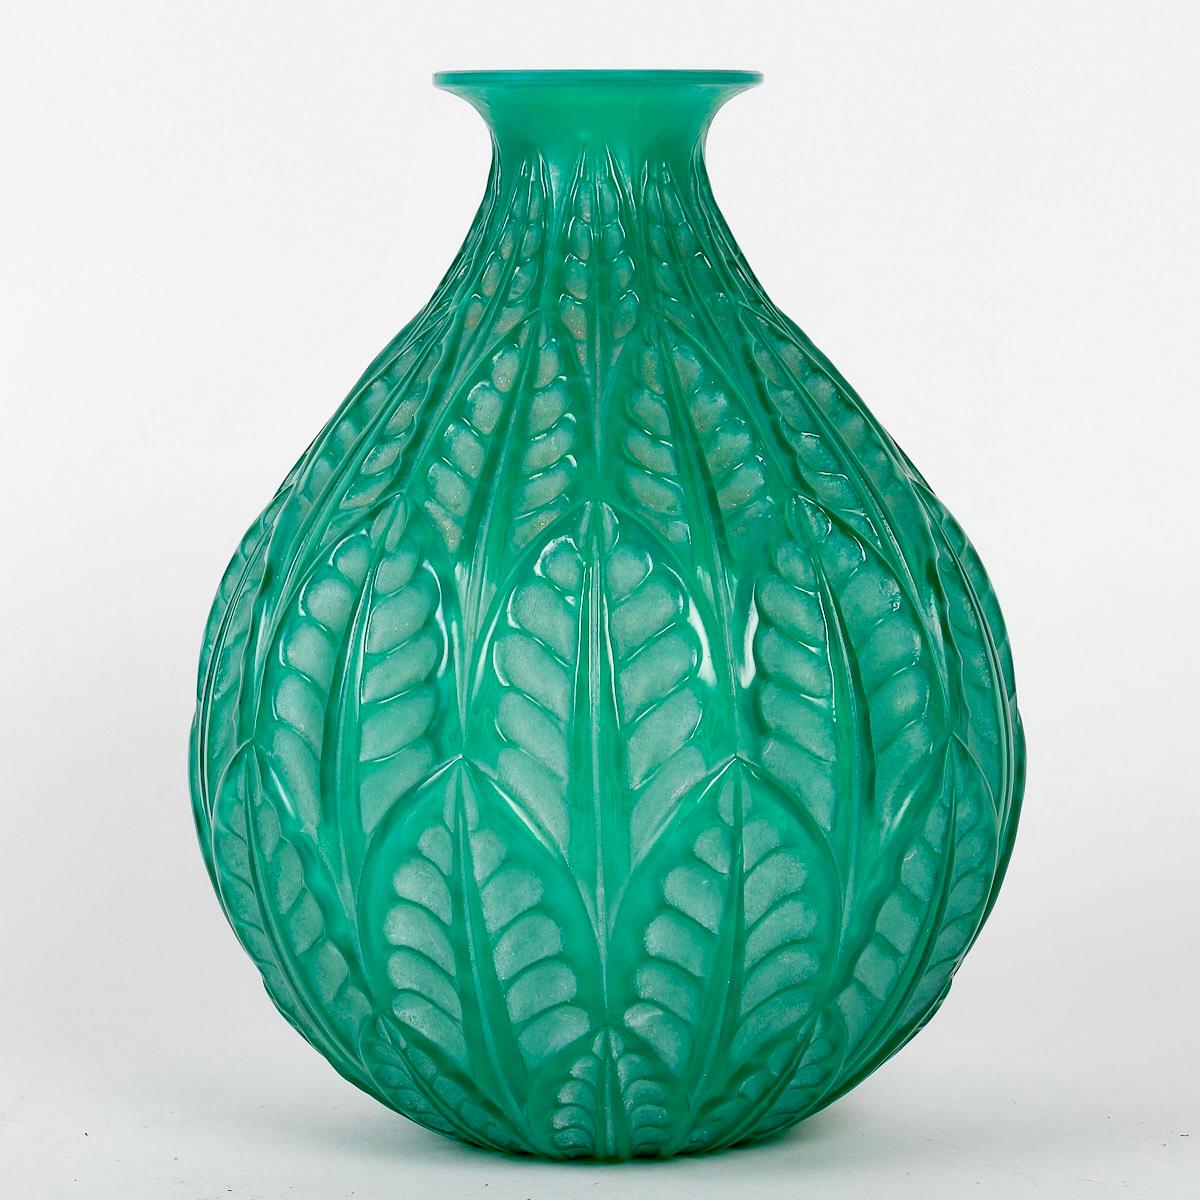 Vase “Malesherbes” made in double cased jade peppermint green glass with white patina by René Lalique in 1927.
Engraved signature on bottom.

Perfect condition. Extremely rare color.

height: 23 cm

Félix Marcilhac, René Lalique - Catalogue Raisonné